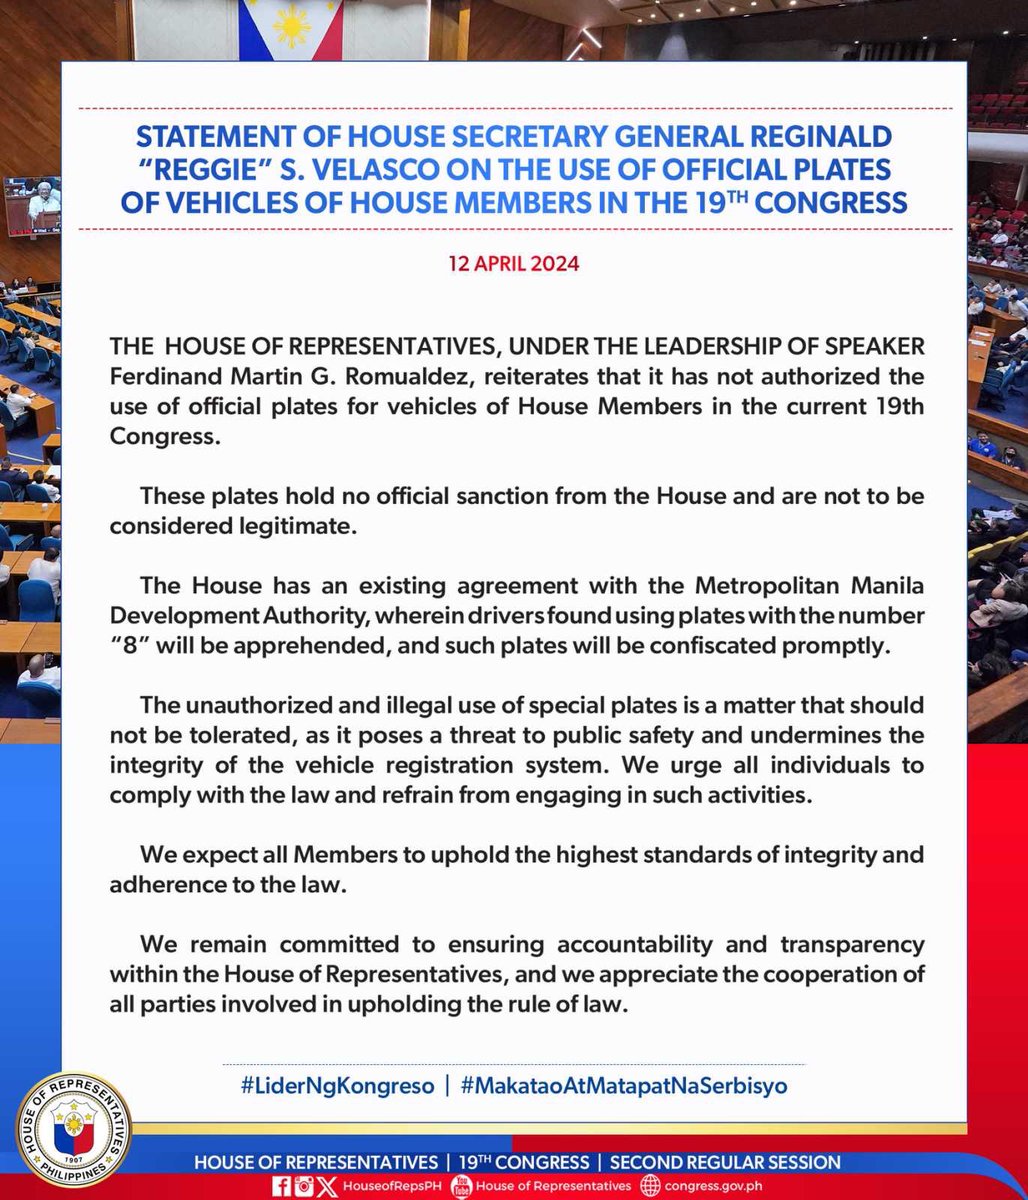 Statement of Secretary General Reginald Velasco on the use of official plates of vehicles of House Members in the 19th Congress #19thCongress #HouseOfRepsPH #LiderNgKongreso #MakataoAtMatapatNaSerbisyo